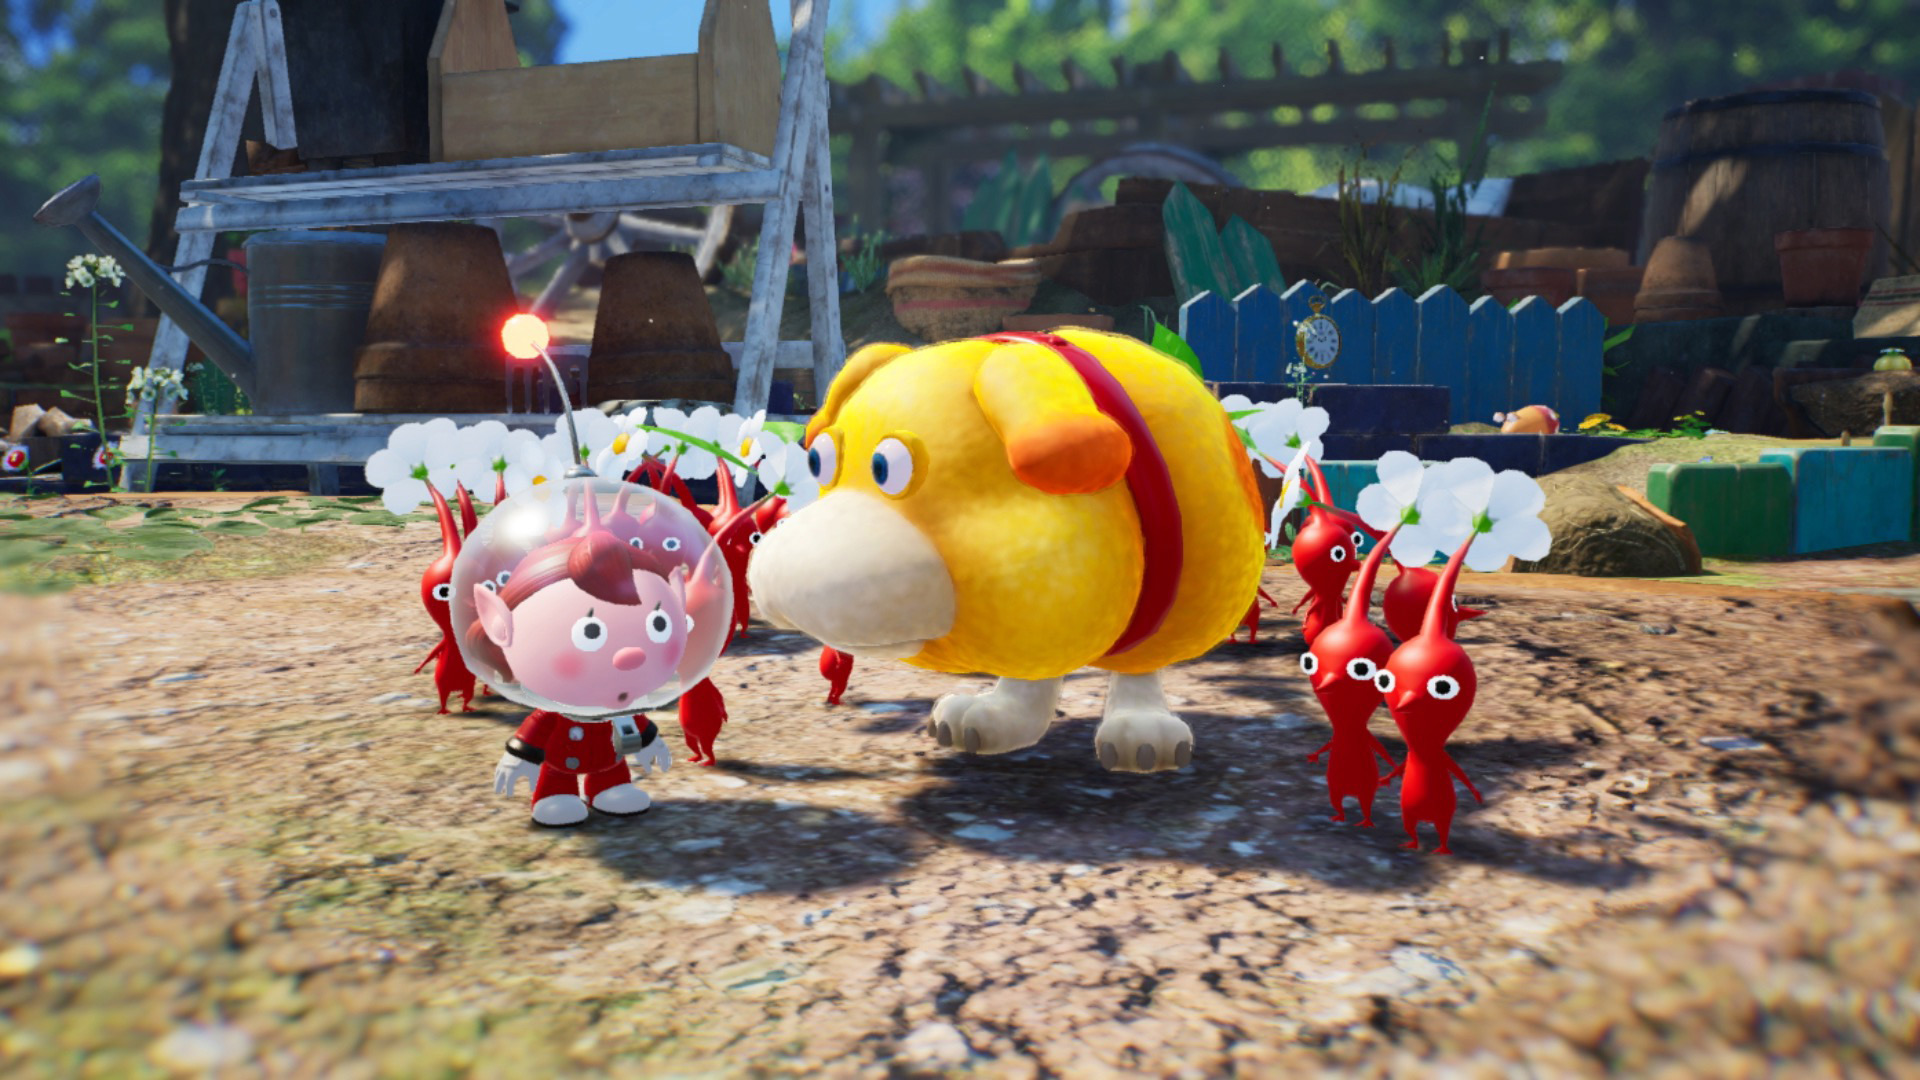 The Pikmin 4 demo is now available for download